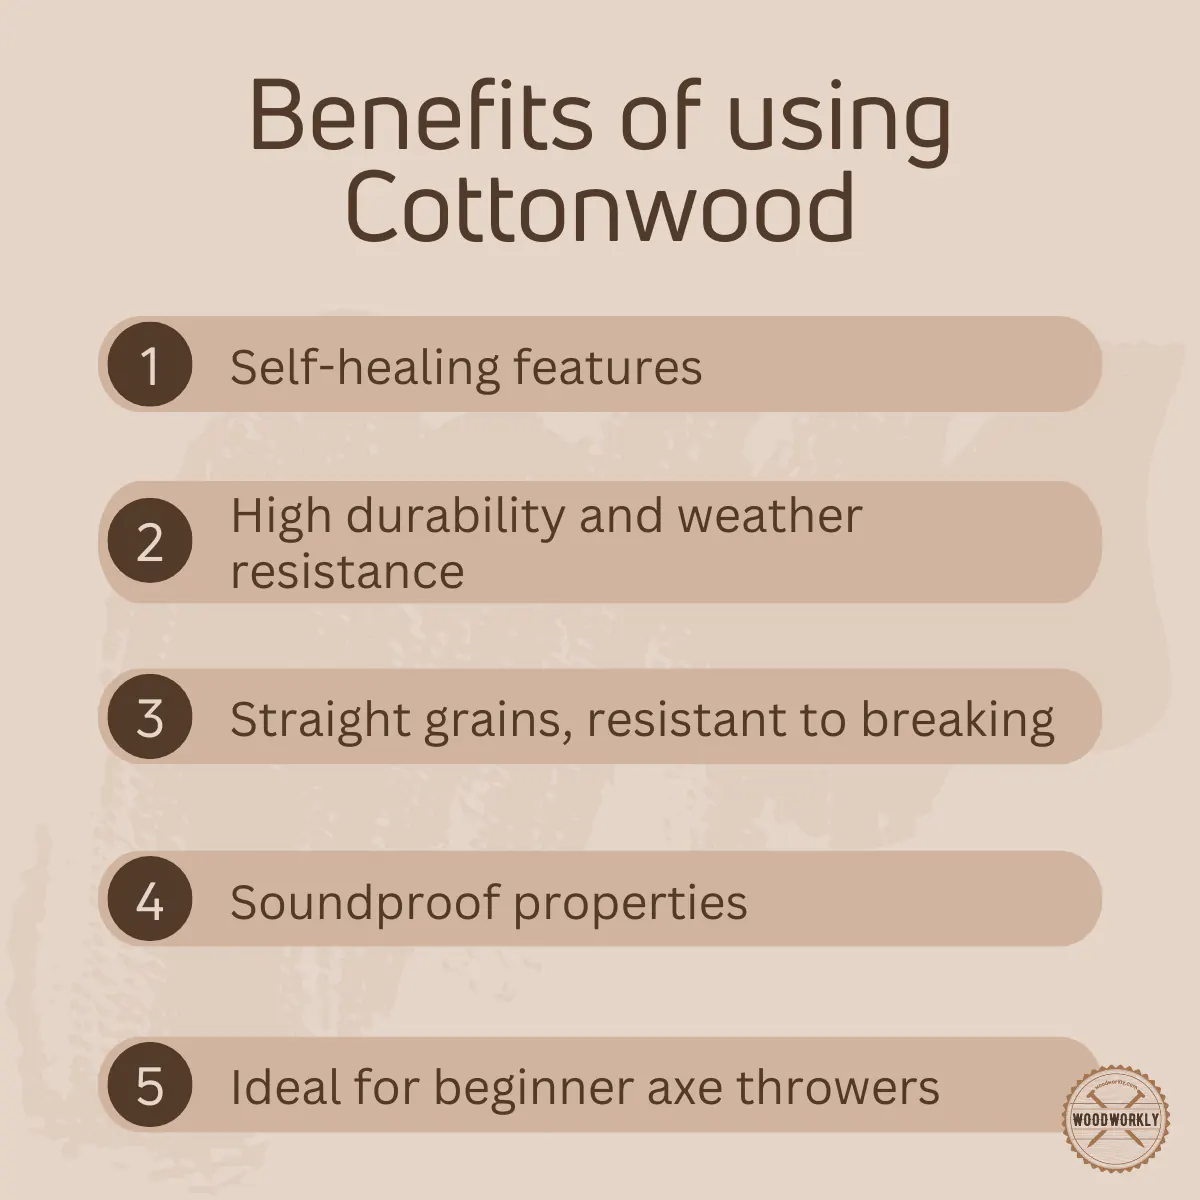 Benefits of using Cottonwood as an axe throwing target